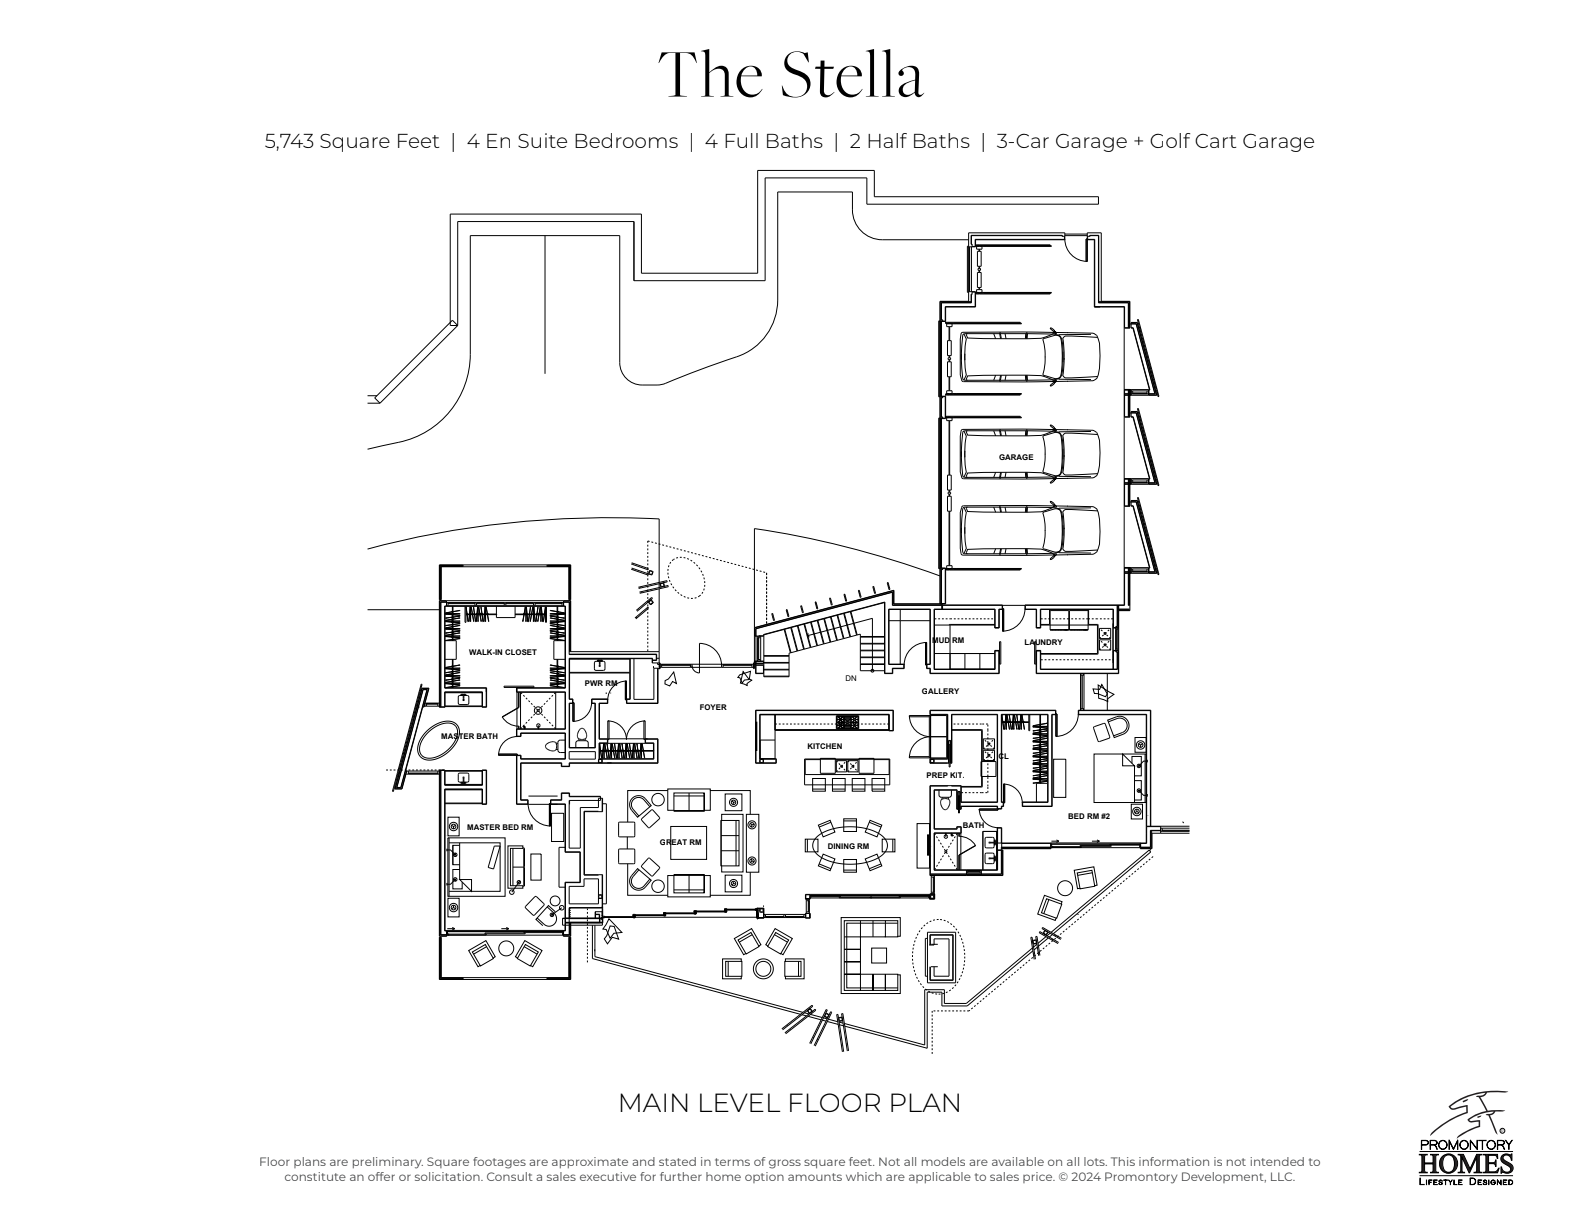 Promontory homes - The Stella